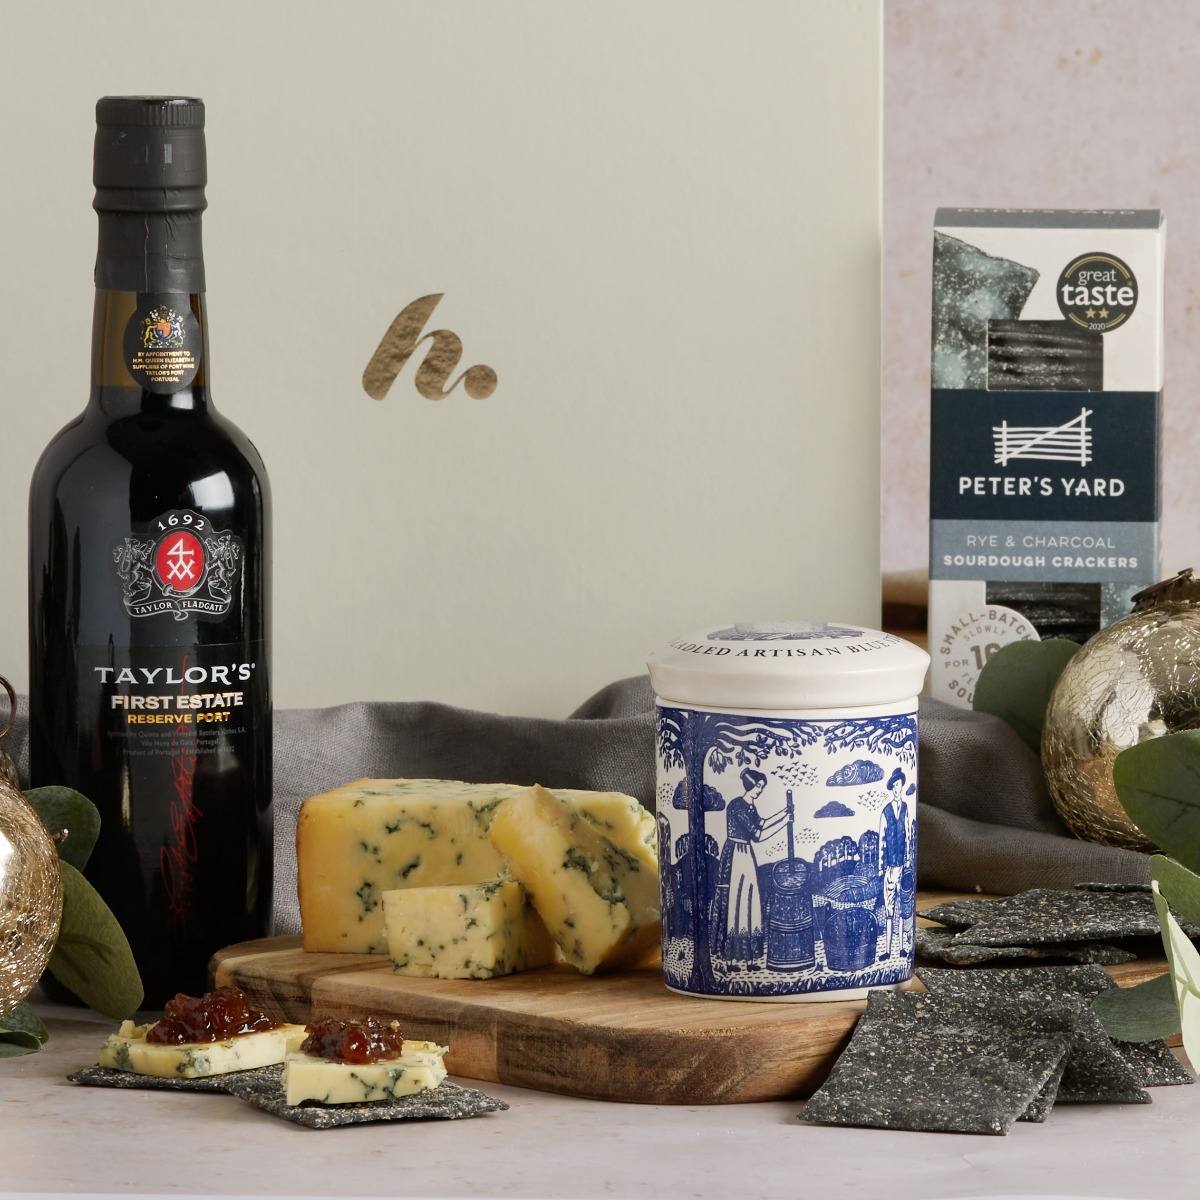 The Little Port & Stilton Christmas Gift Box with contents on display